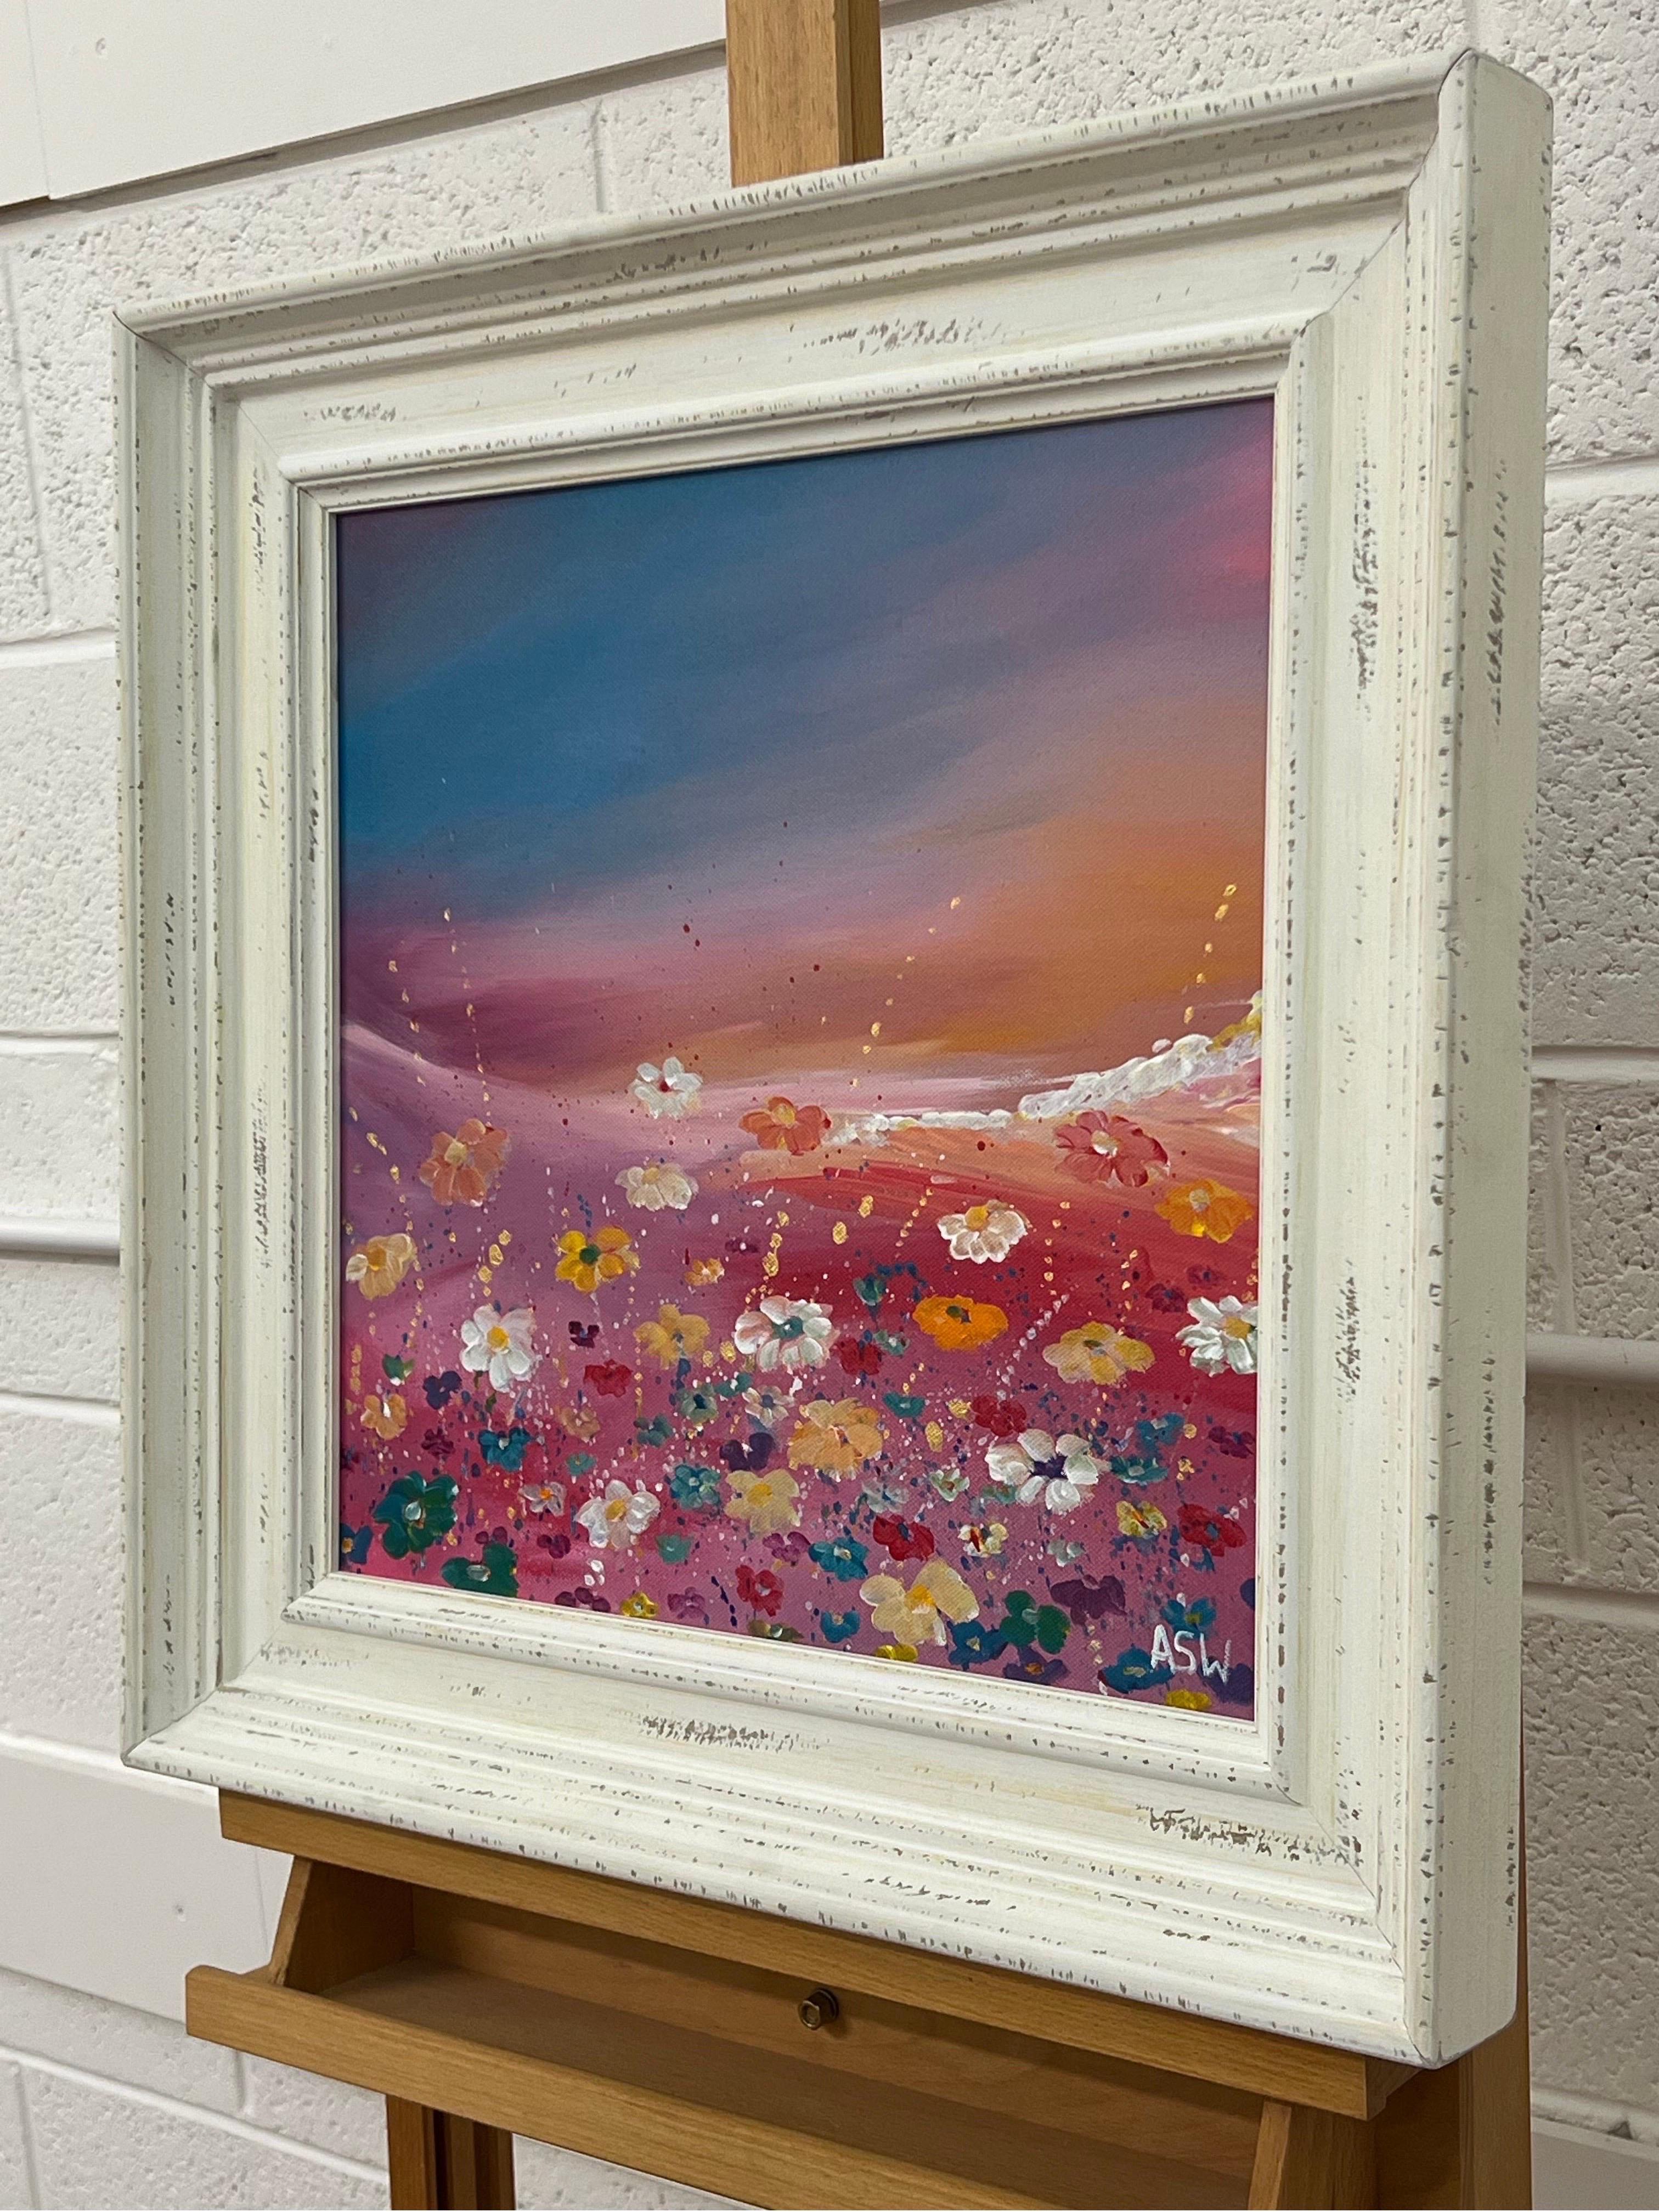 Multi Coloured Wild Flowers on a Turquoise & Pink Background by Contemporary Artist, Angela Wakefield. This is a dreamy imagined landscape with abstract flowers in a meadow on a hillside.

Art measures 16 x 16 inches
Frame measures 22 x 22